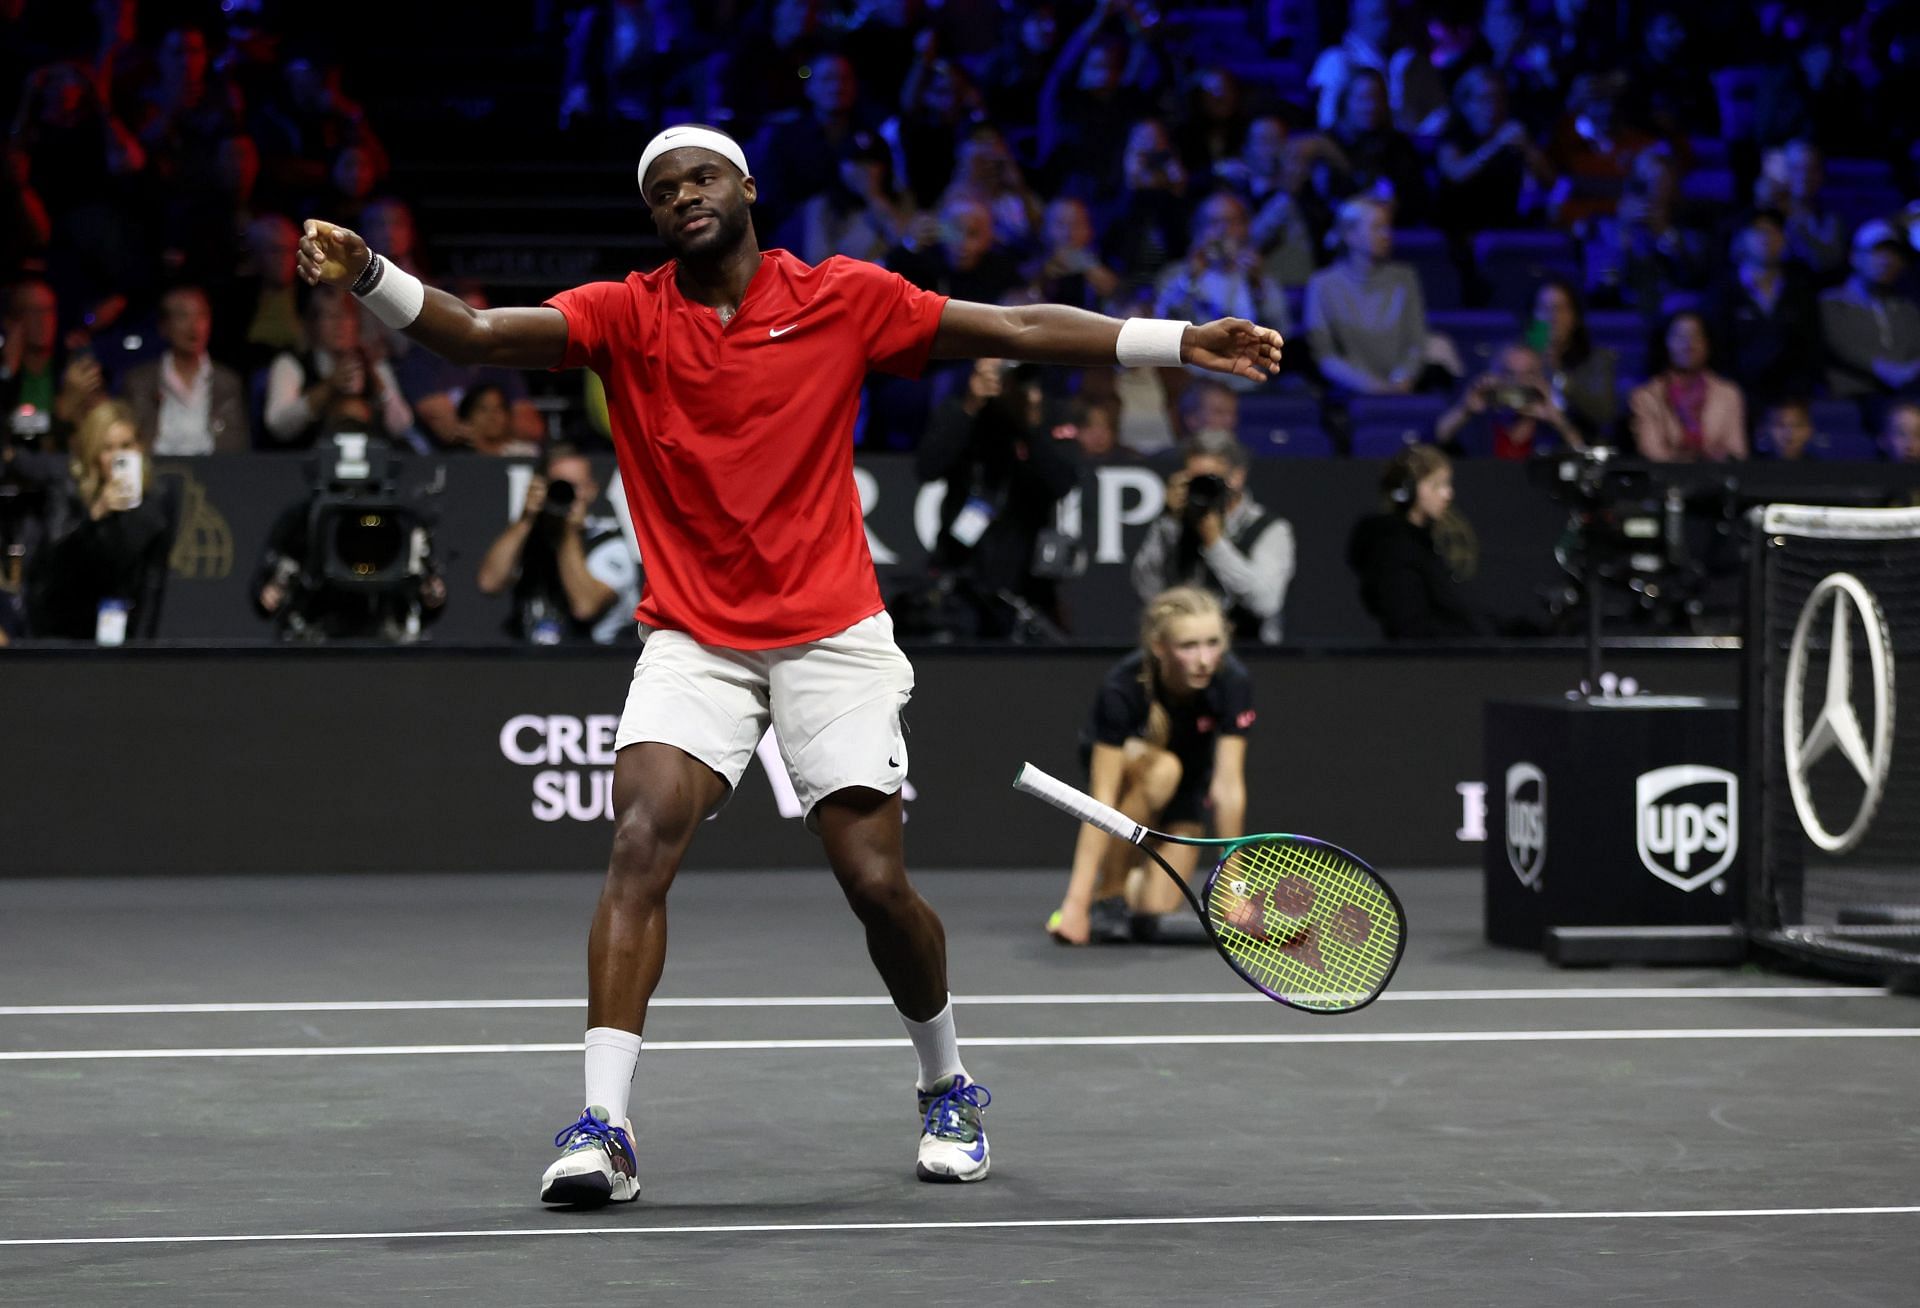 Frances Tiafoe at the 2022 Laver Cup.